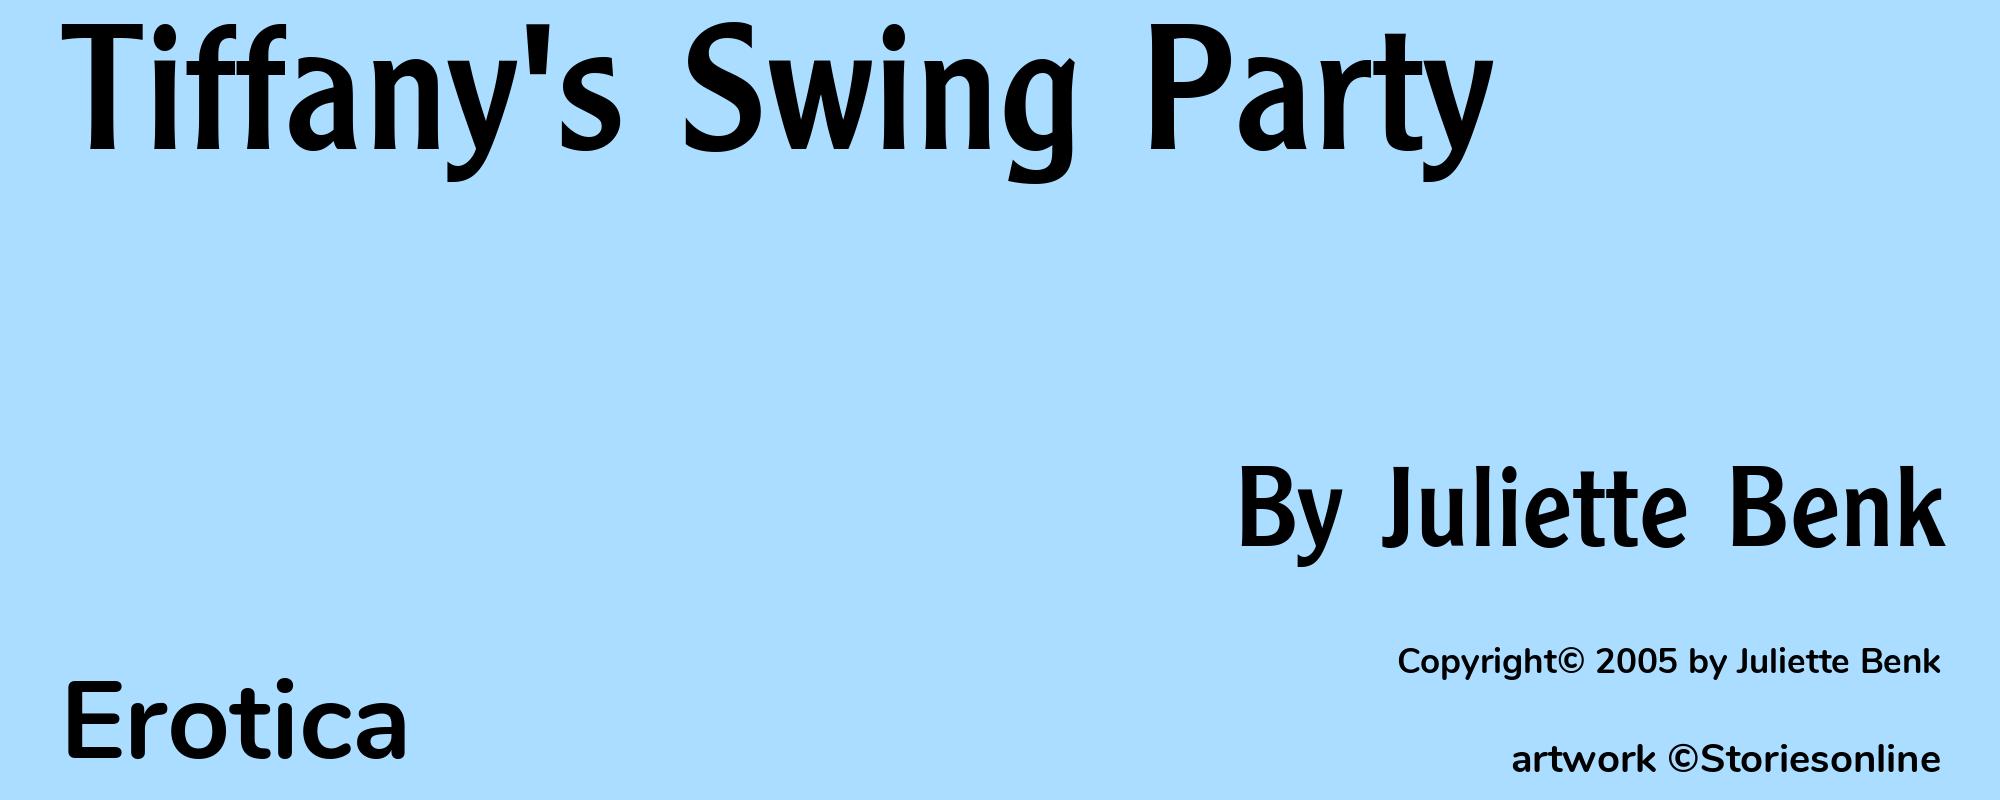 Tiffany's Swing Party - Cover